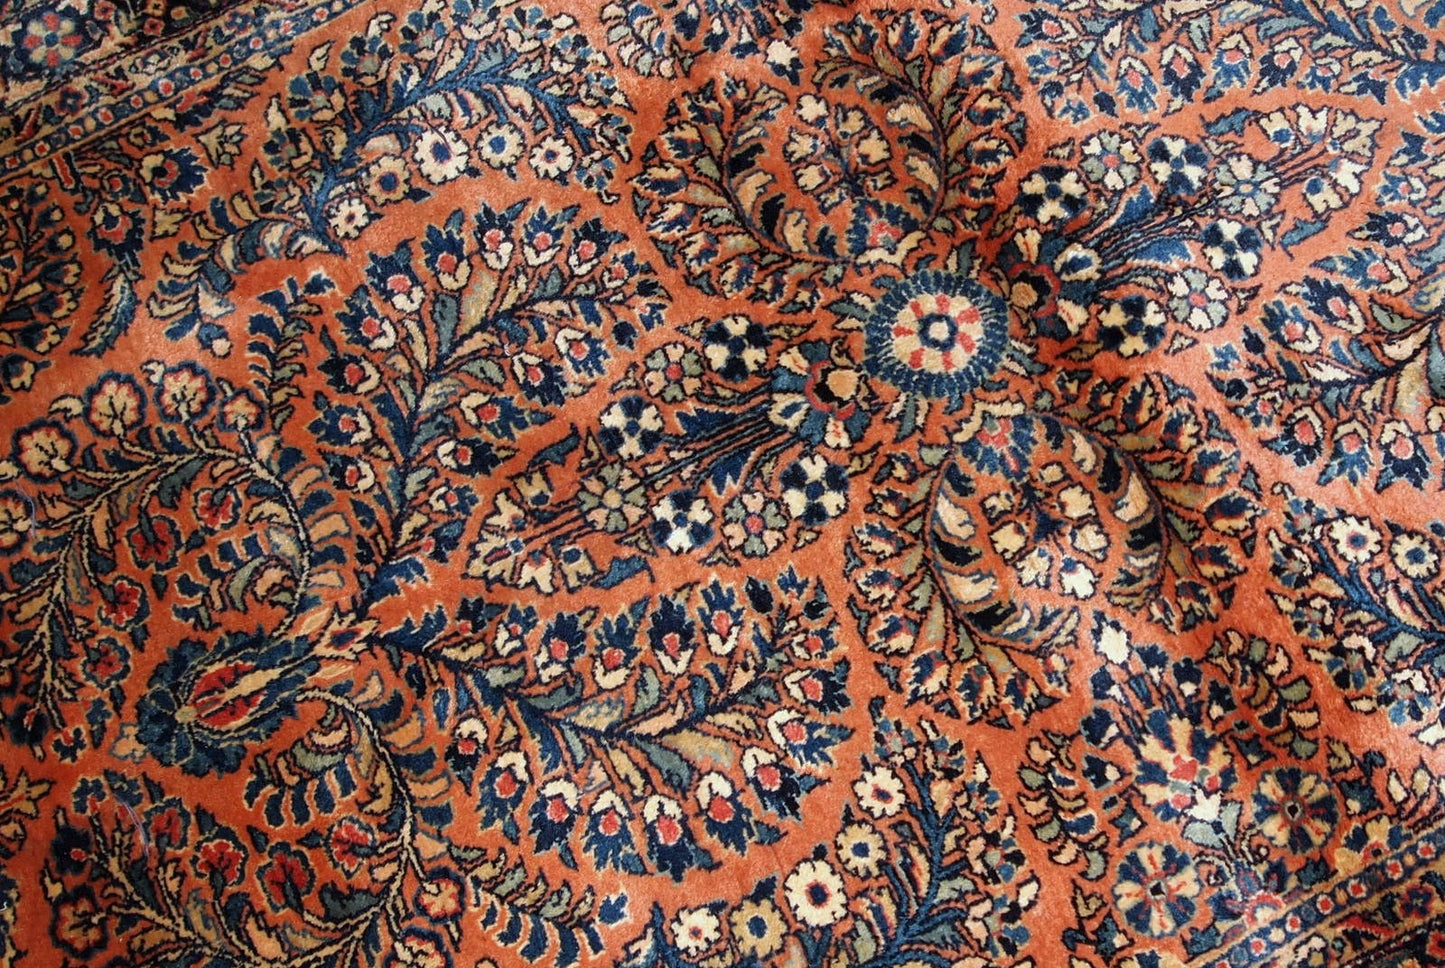 Handmade antique Persian Sarouk rug in original condition, it as some age wear on one corner. The rug is from the beginning of 20th century made in traditional floral design.